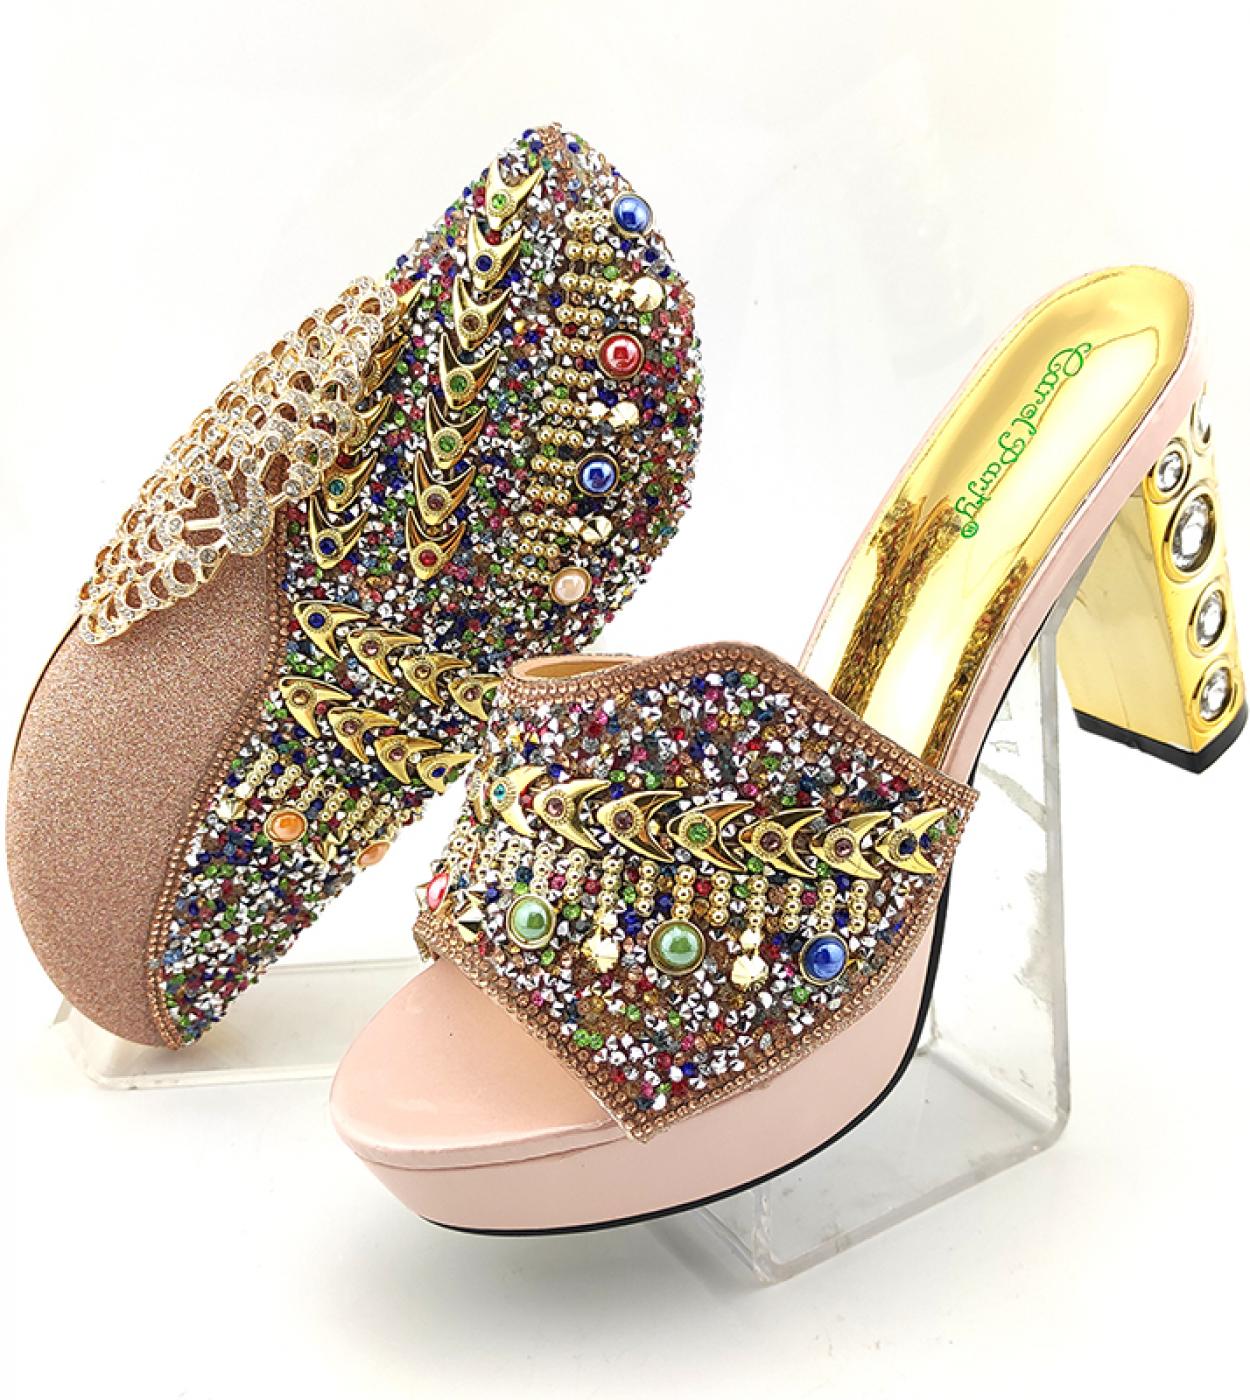 New Arrival Hot Selling Peach Color Crystal Italian Design Elegant Noble Style Ladies Shoes And Bag Set For Party  Pumps